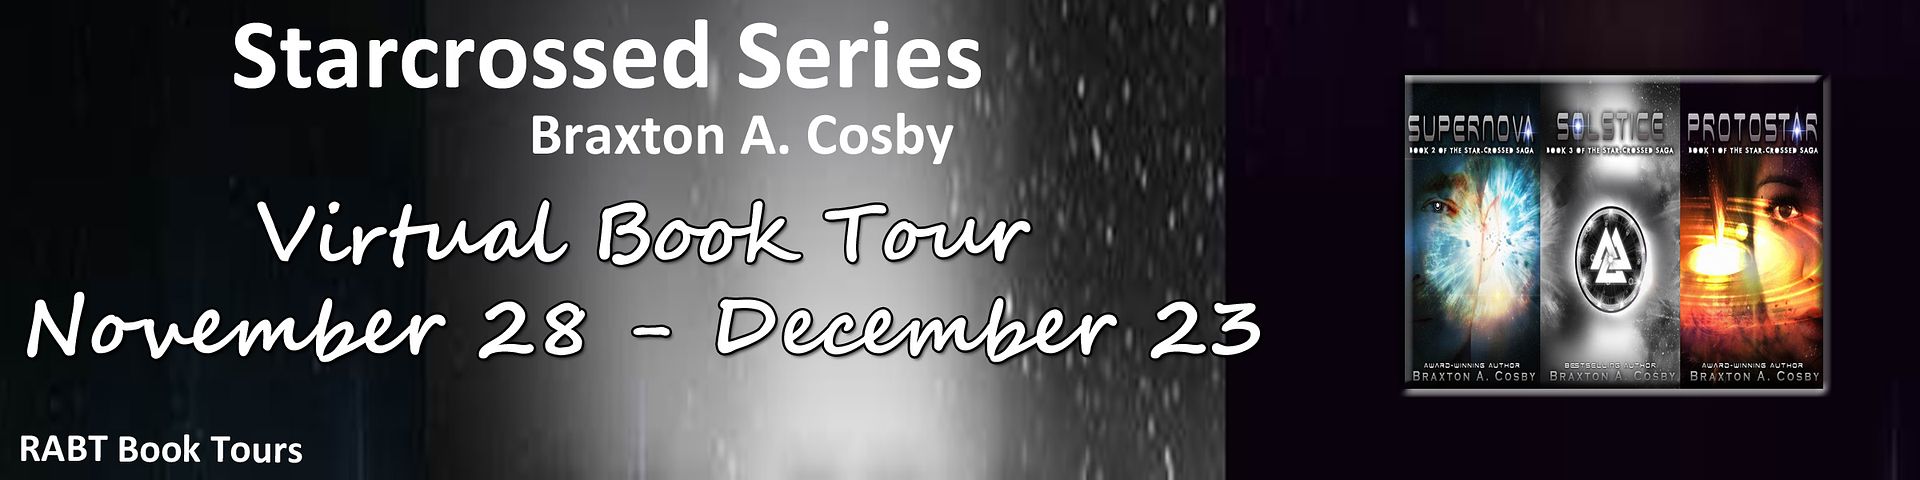 Blog Tour: The Star-Crossed Saga Series by @BraxtonACosby #interview